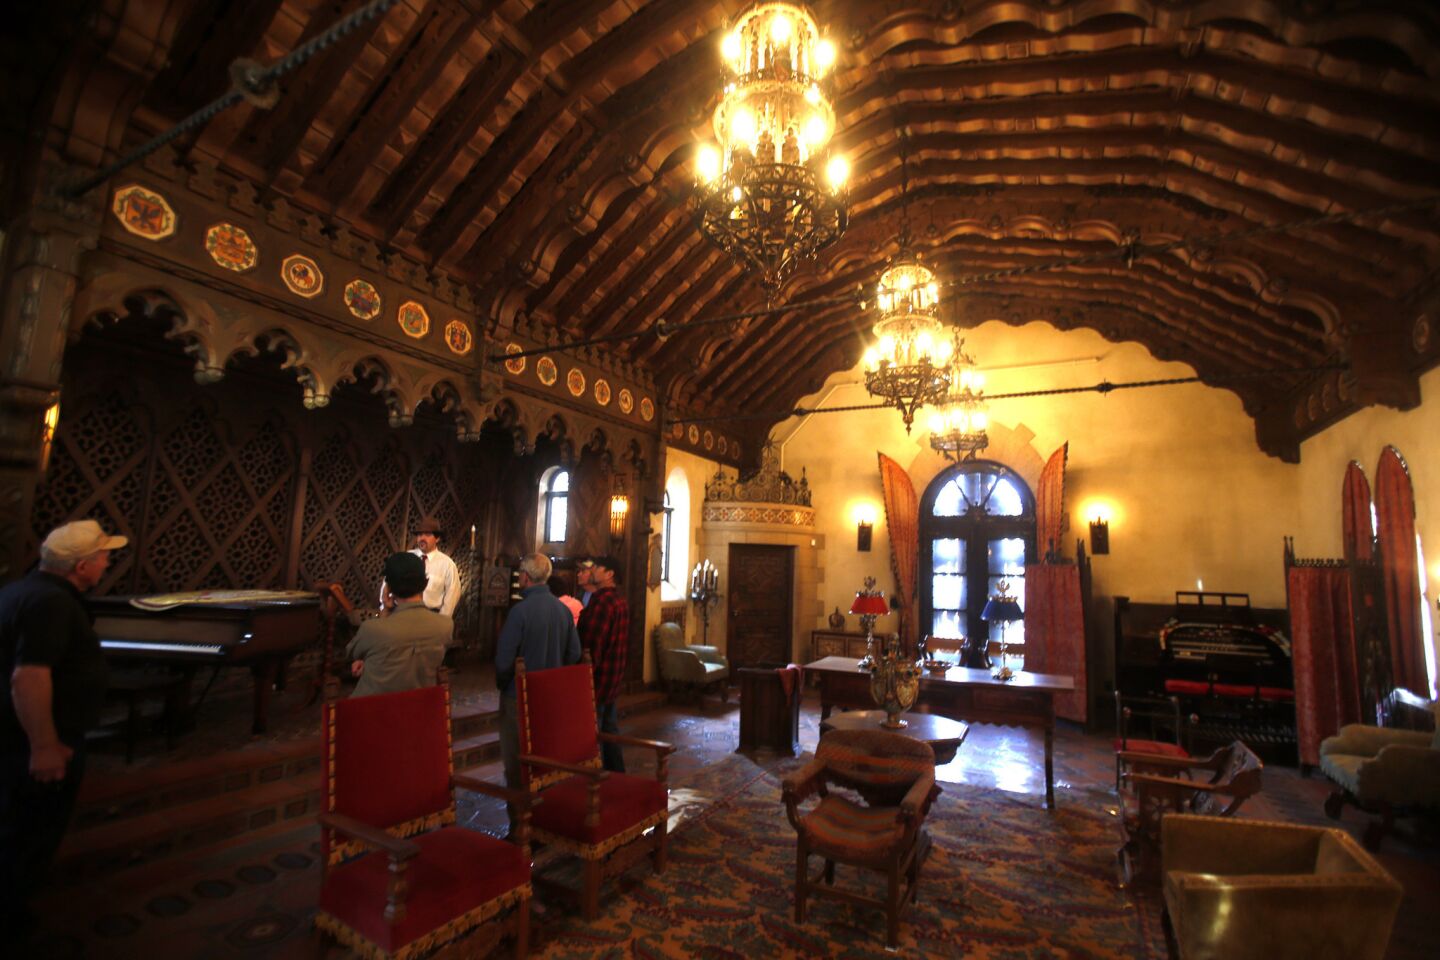 The music room of Scotty's Castle.